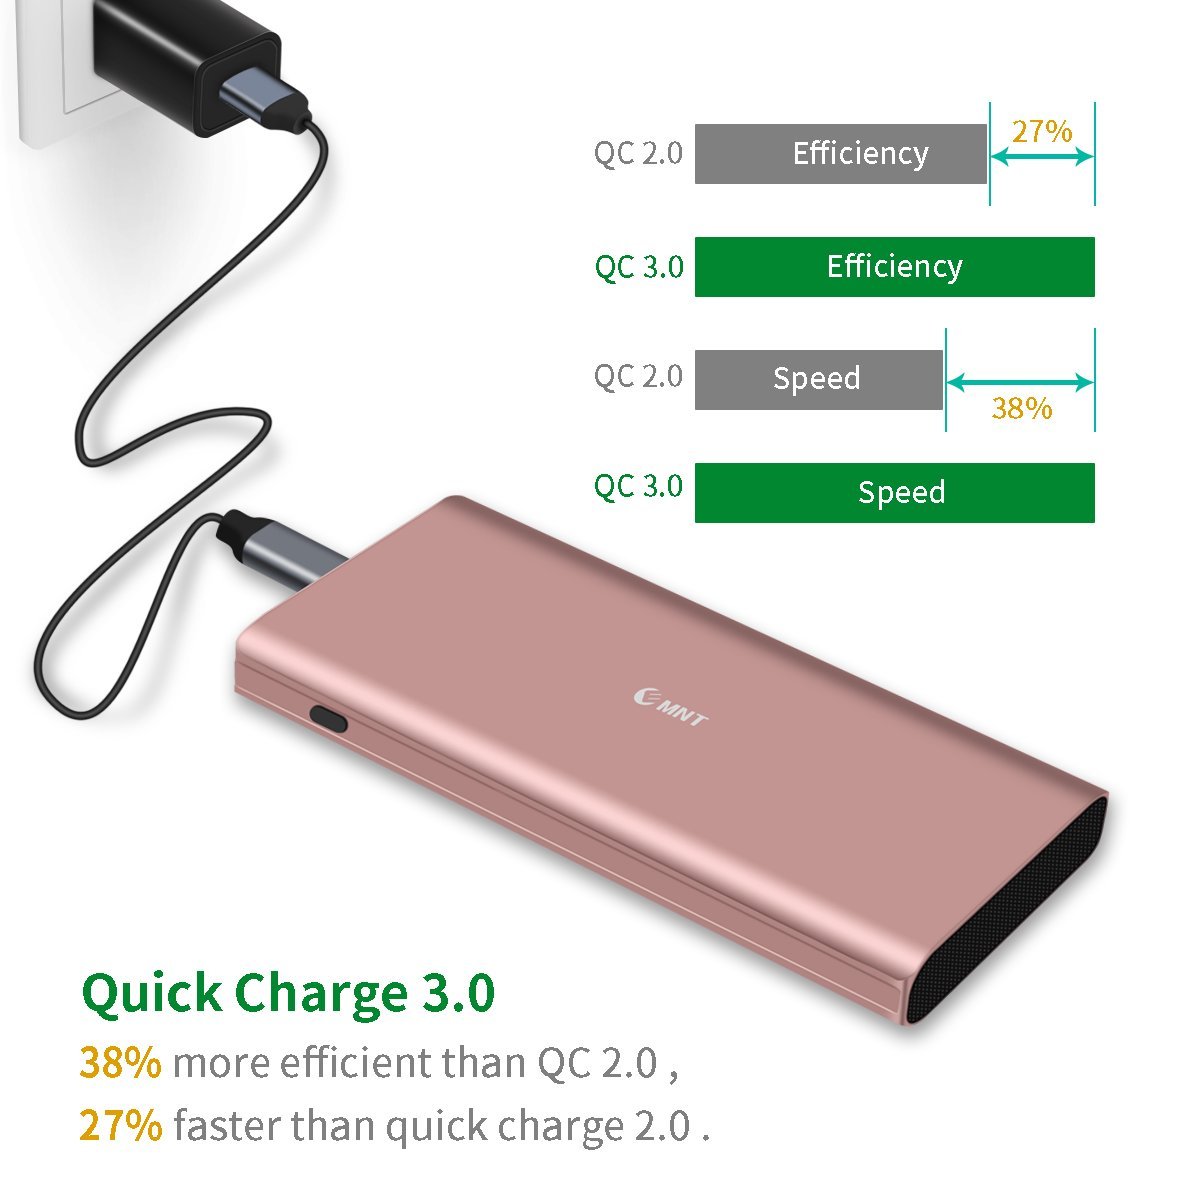 Doodt lint Handboek Portable Charger,Emnt 10400mAh Quick Charge 3.0 Power Bank QC 3.0 Dual USB  Port Compact External Backup Battery Pack with Indicator for Iphone,Ipad,Samsung  Galaxy,Tablet,Camera,Kindle and More-Pink - CHARGE WITH POWER